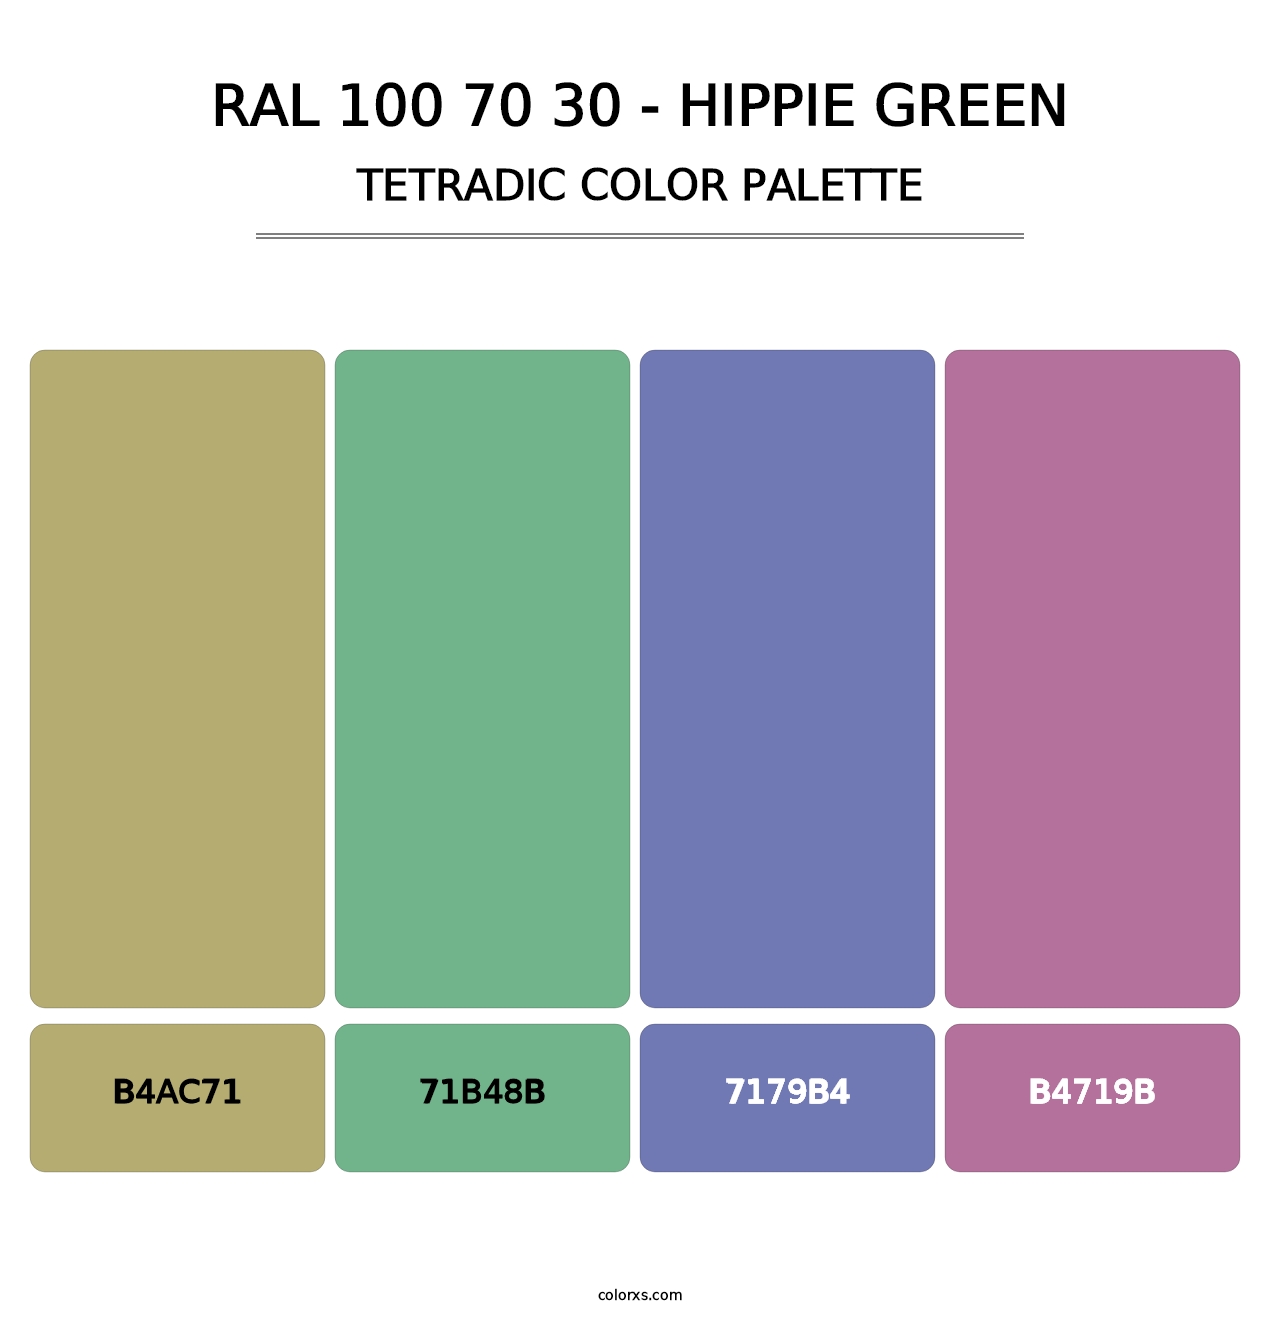 RAL 100 70 30 - Hippie Green - Tetradic Color Palette